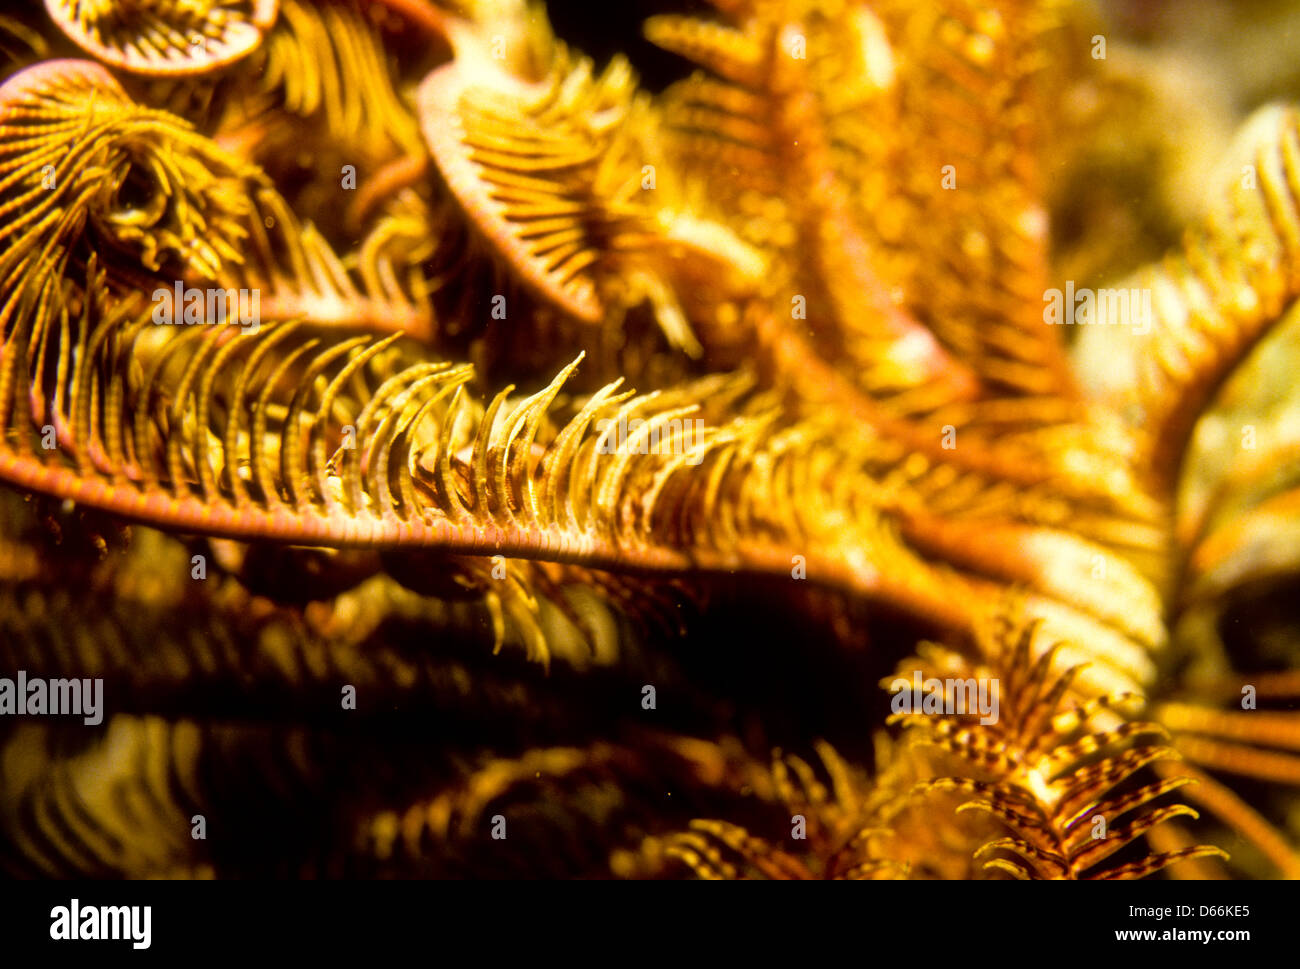 Feathery arms of Crinoids or Comanthus bennetti,Feather Stars,Sipadan Nov 1990 Underwater Slide Conversions,Sabah,Malaysia Stock Photo